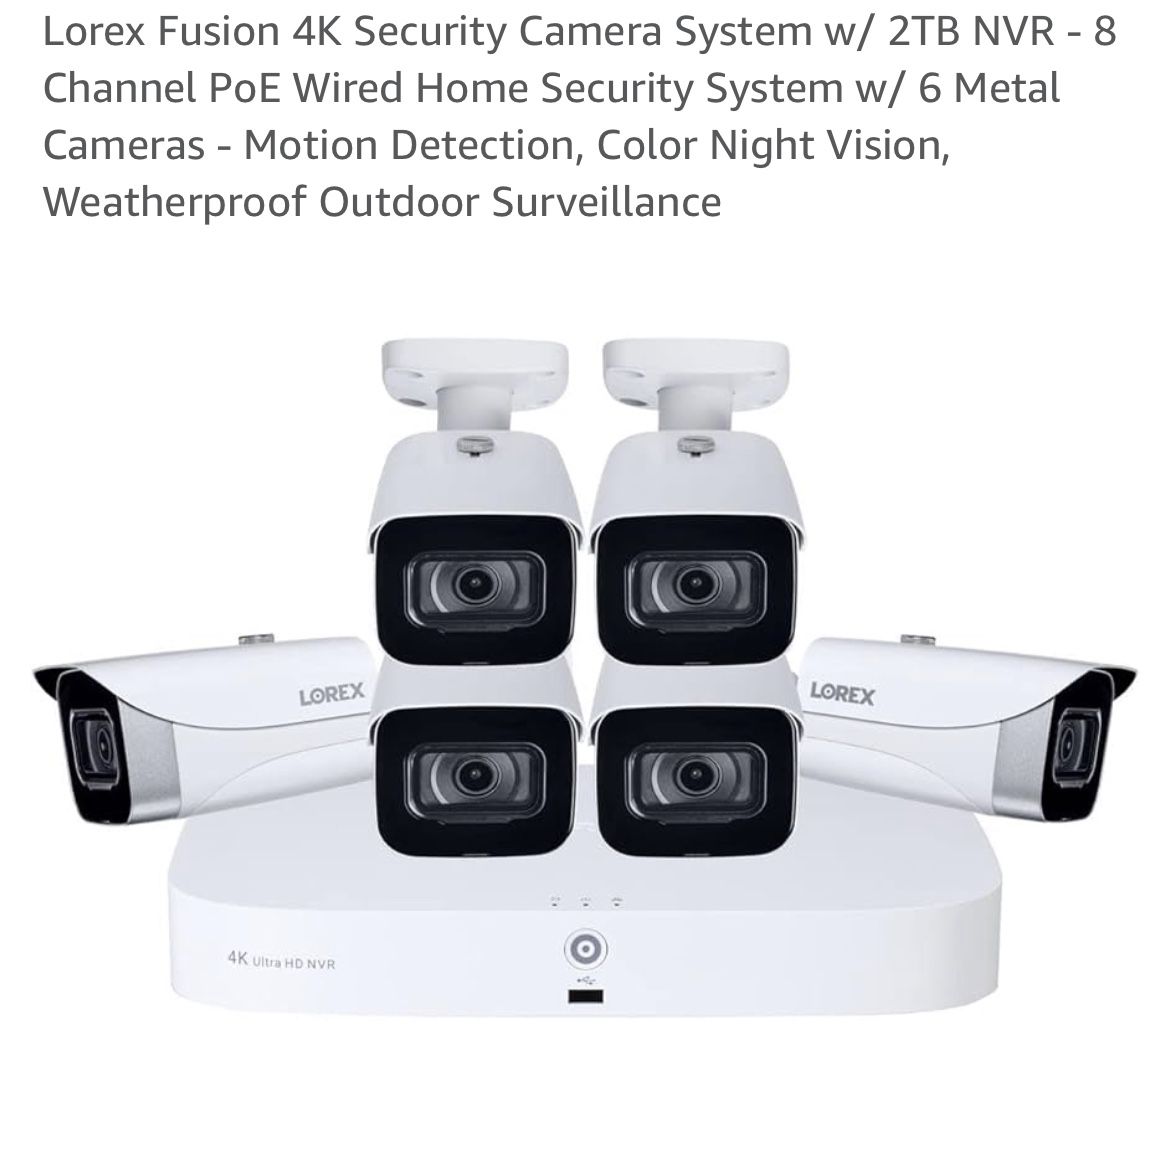 Lorex Fusion 4K Security Camera System w/ 2TB NVR - 8 Channel PoE Wired Home Security System w/ 6 Metal Cameras - Motion Detection, Color Night Vision